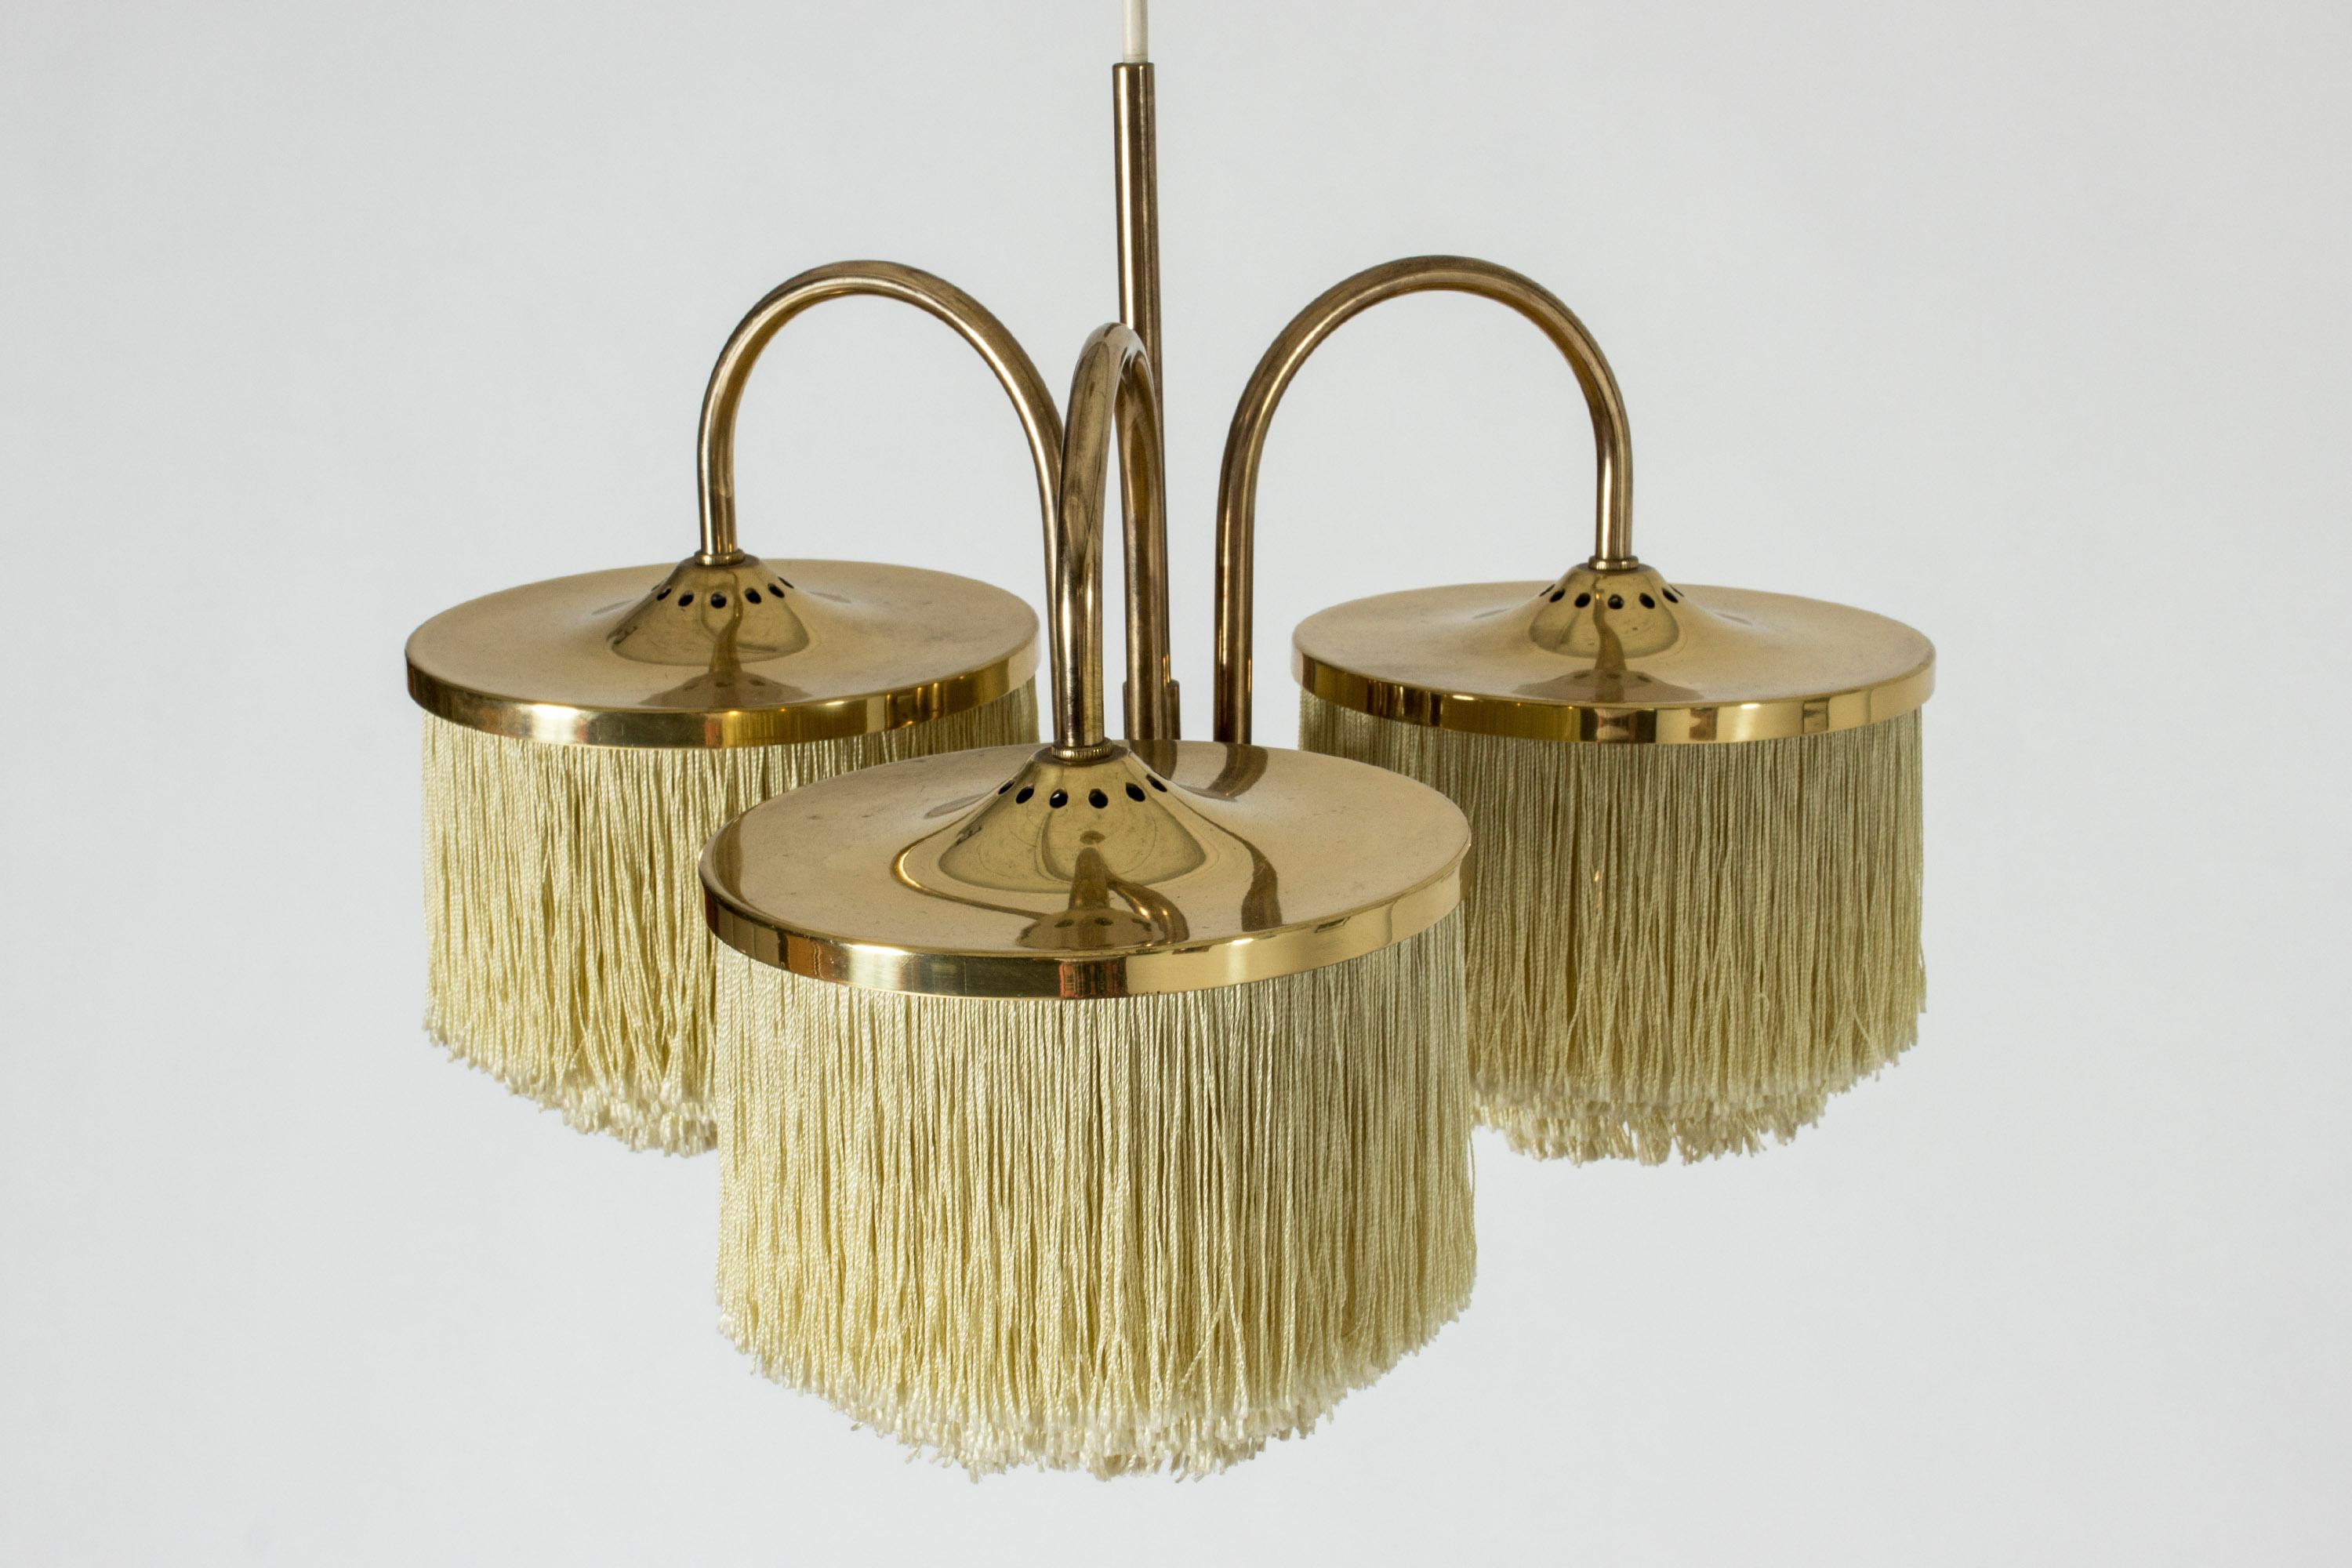 Lovely “Fringe” ceiling lamp by Hans-Agne Jakobsson, made from brass. Drapes of textile chords are suspended in layers from the three shades. Perfect boudoir lighting.